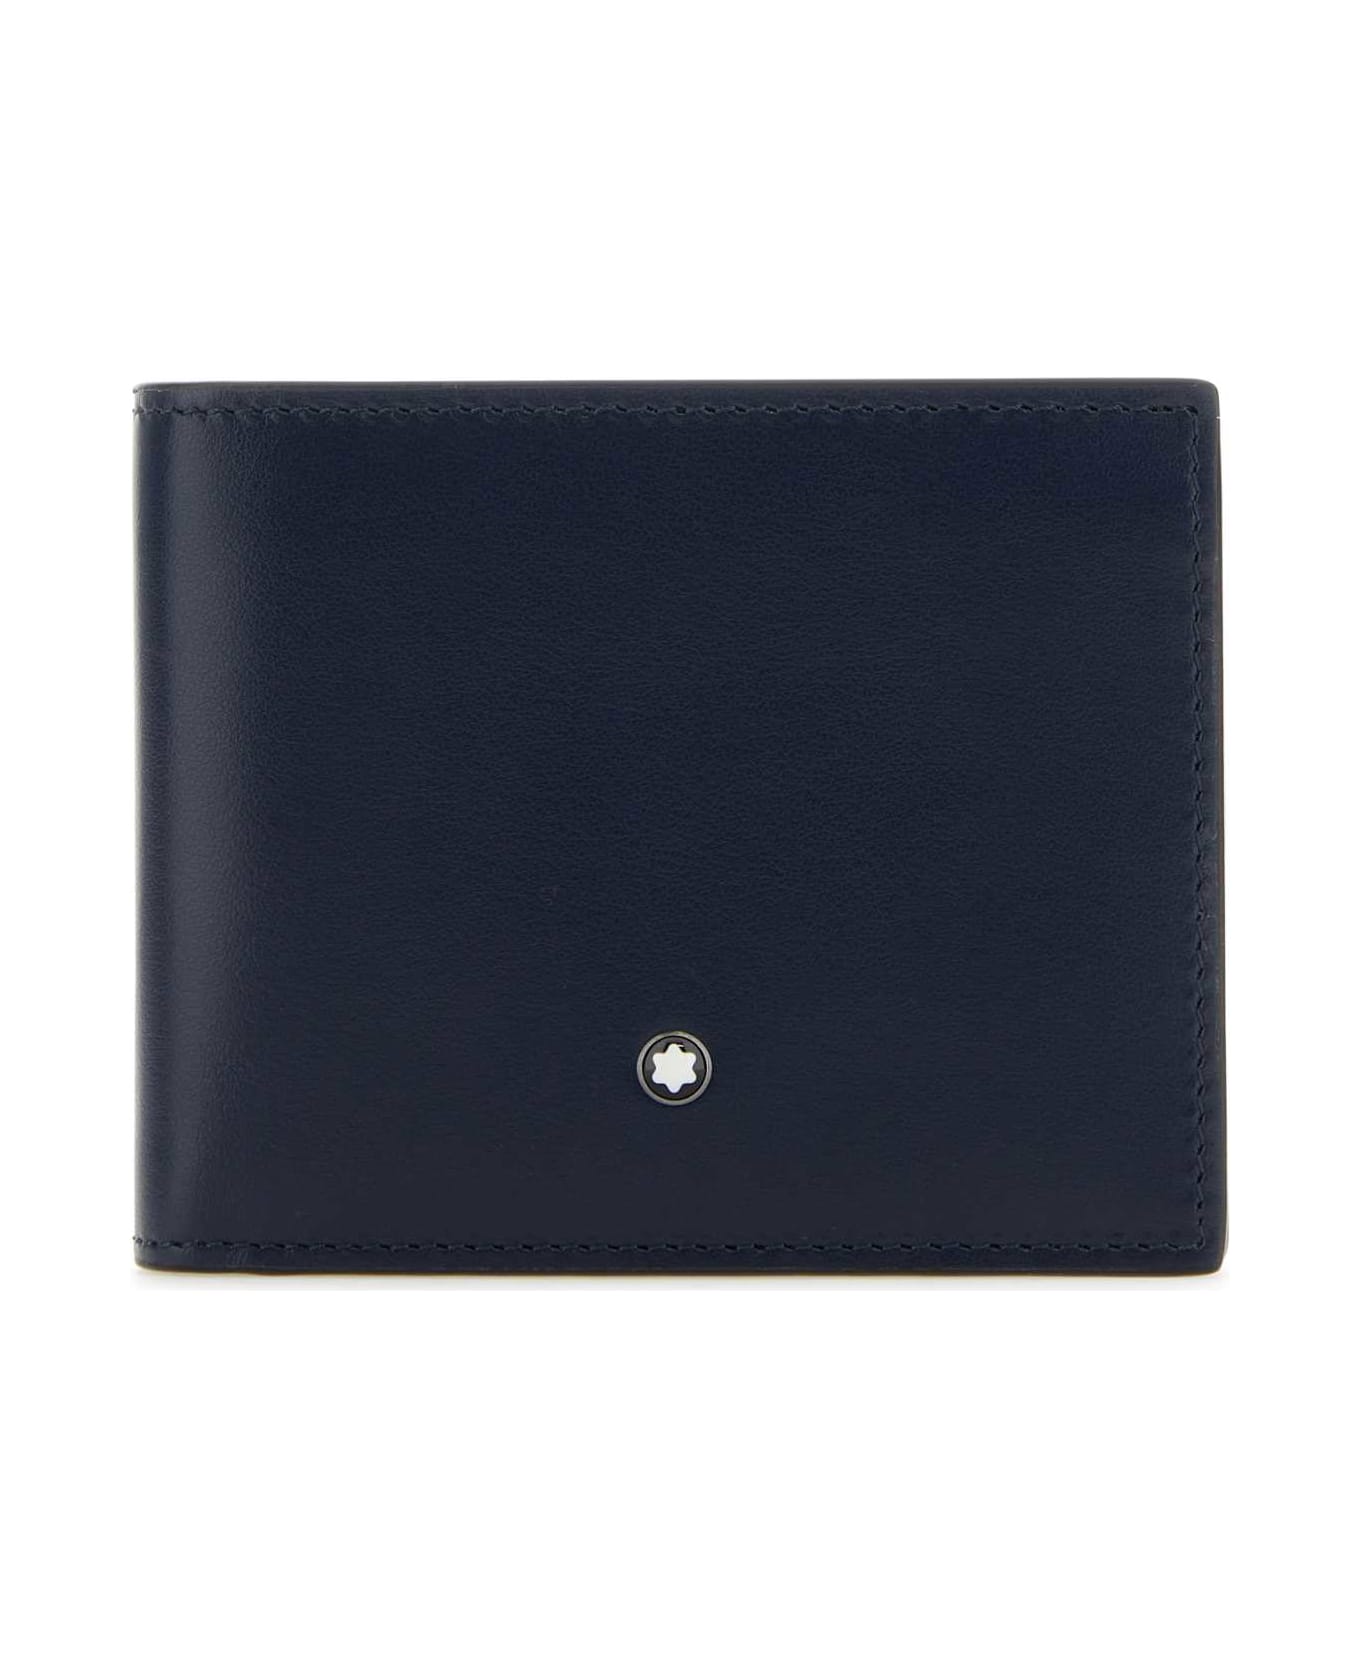 Montblanc Navy Blue Leather Wallet - INKBLUE